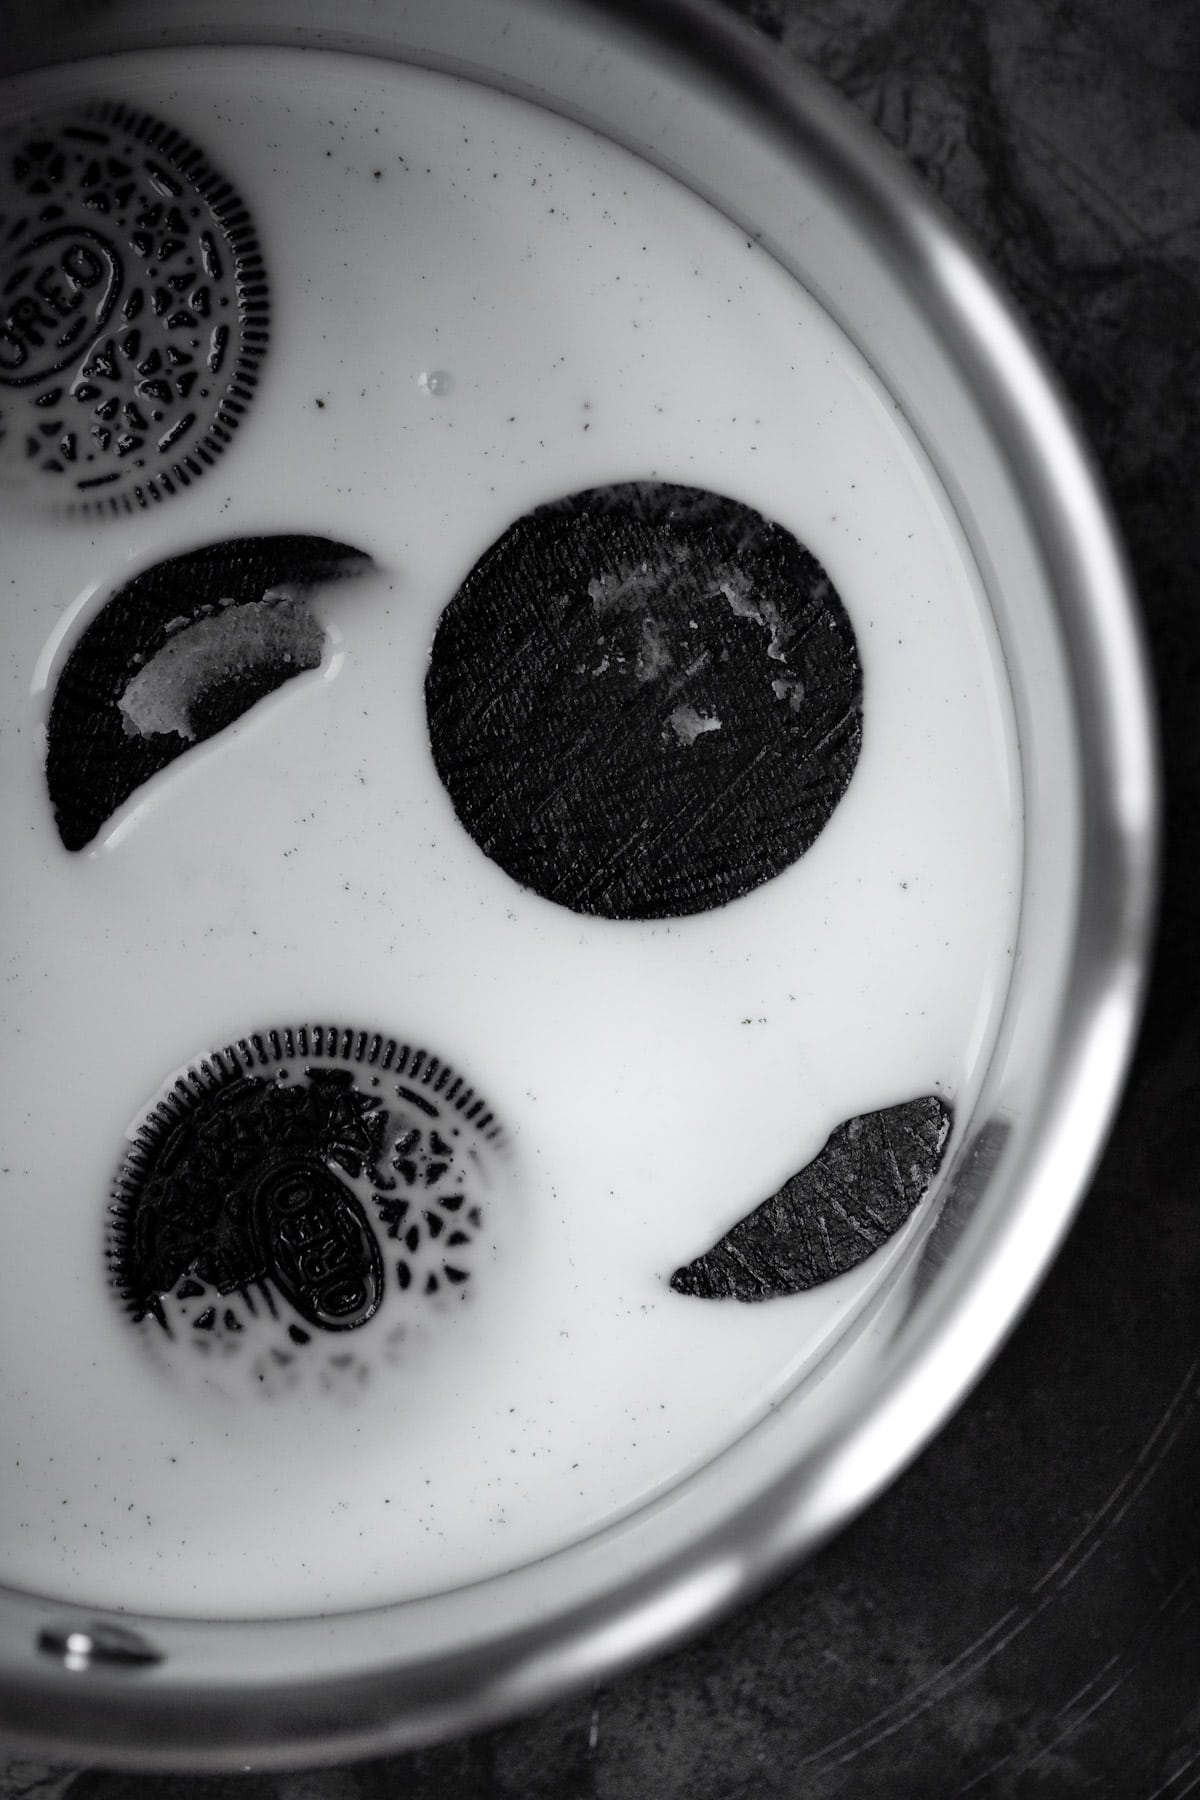 Large oreo cookies in milk in a saucepan, not yet fully dissolved.